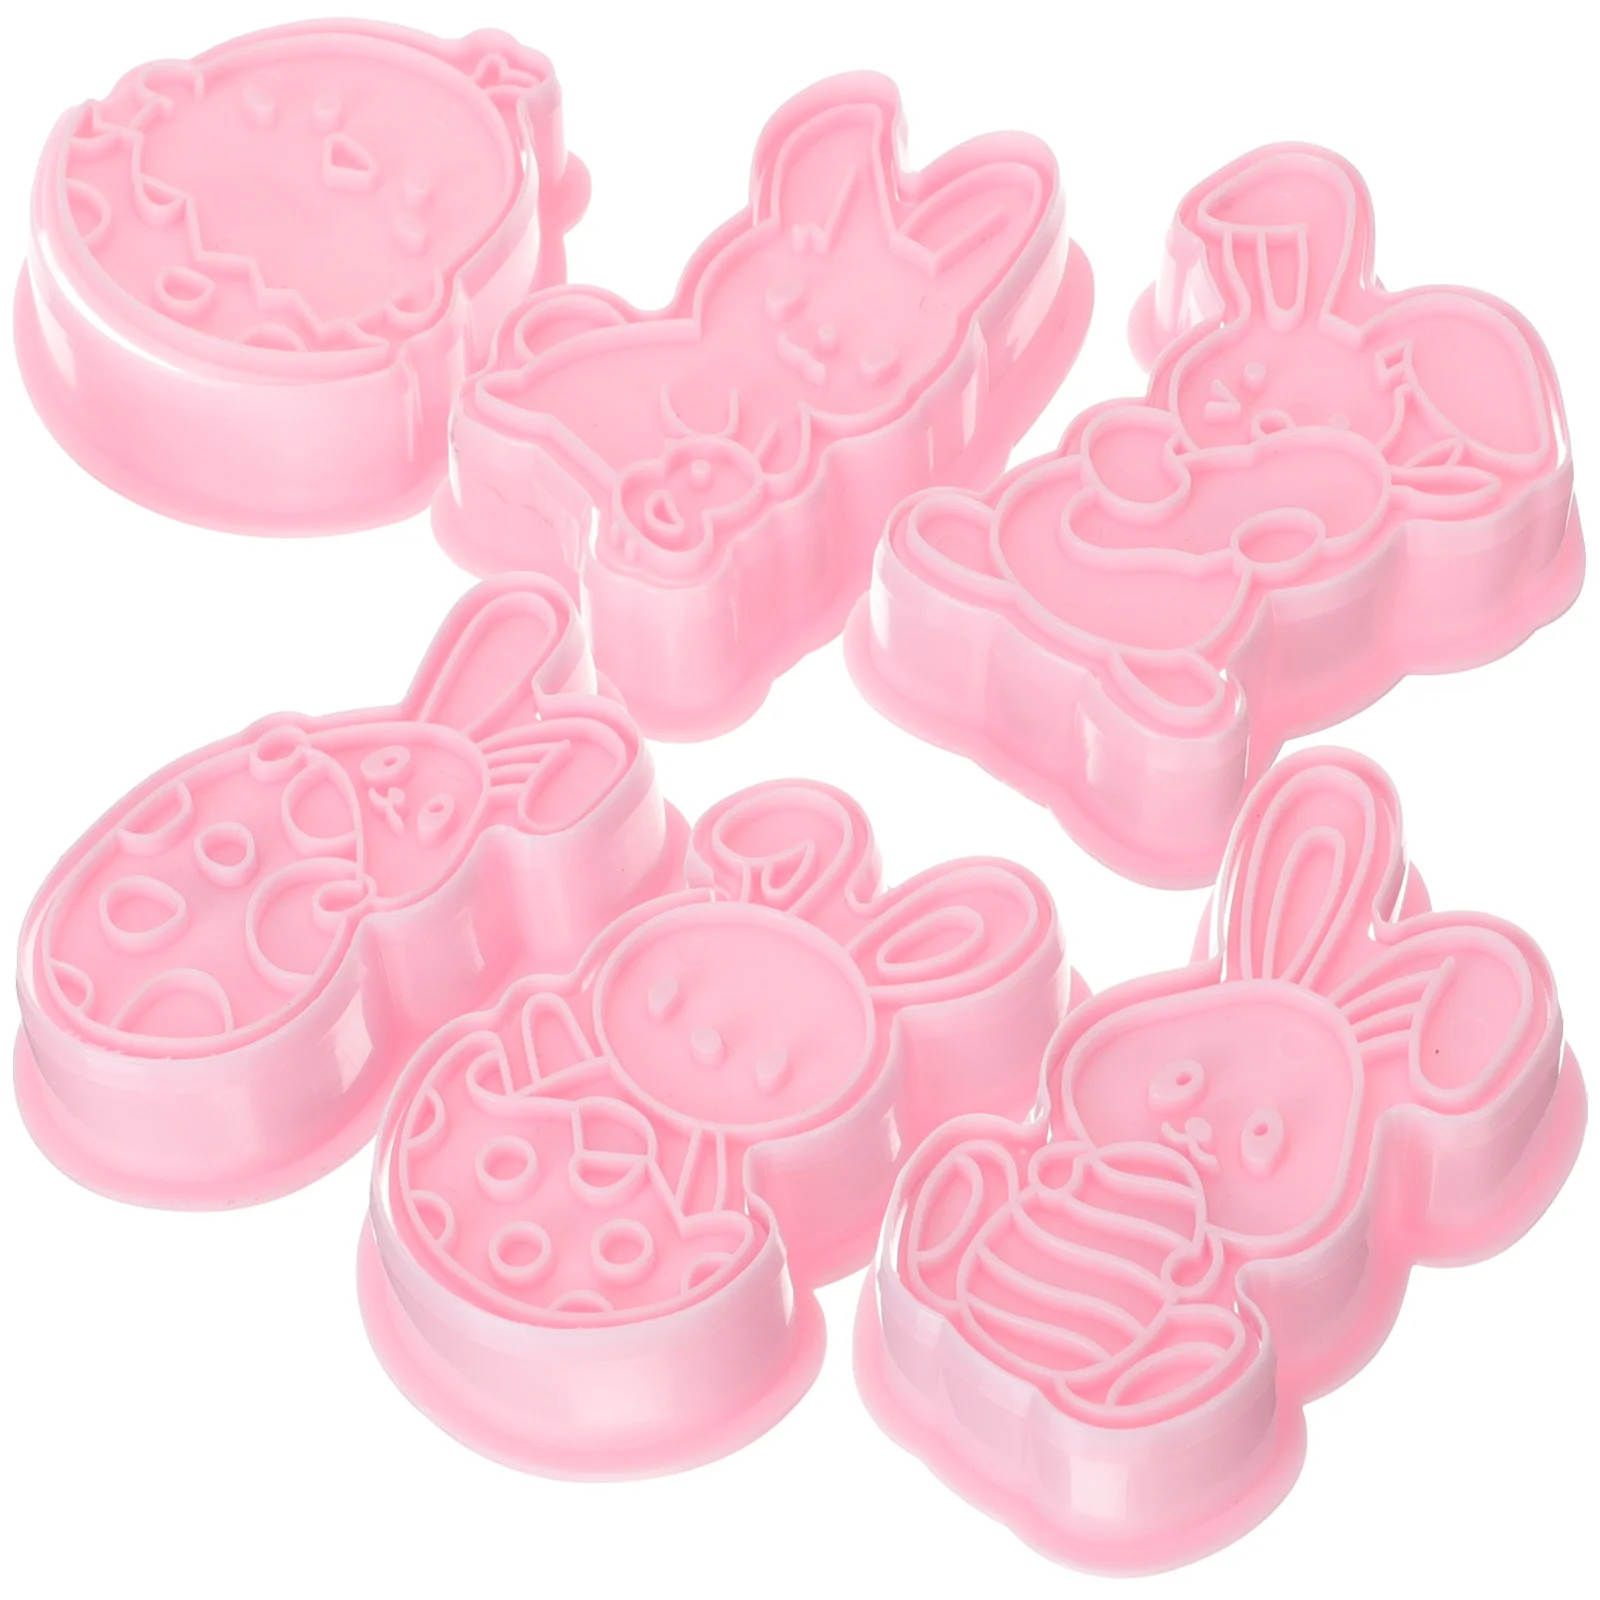 

Baking Molds Eastercookie Diy Cake Silicone Mould Bunny Moulds Stamper Fondant Christmas Tray Tools Biscuit Candy Animal Dessert